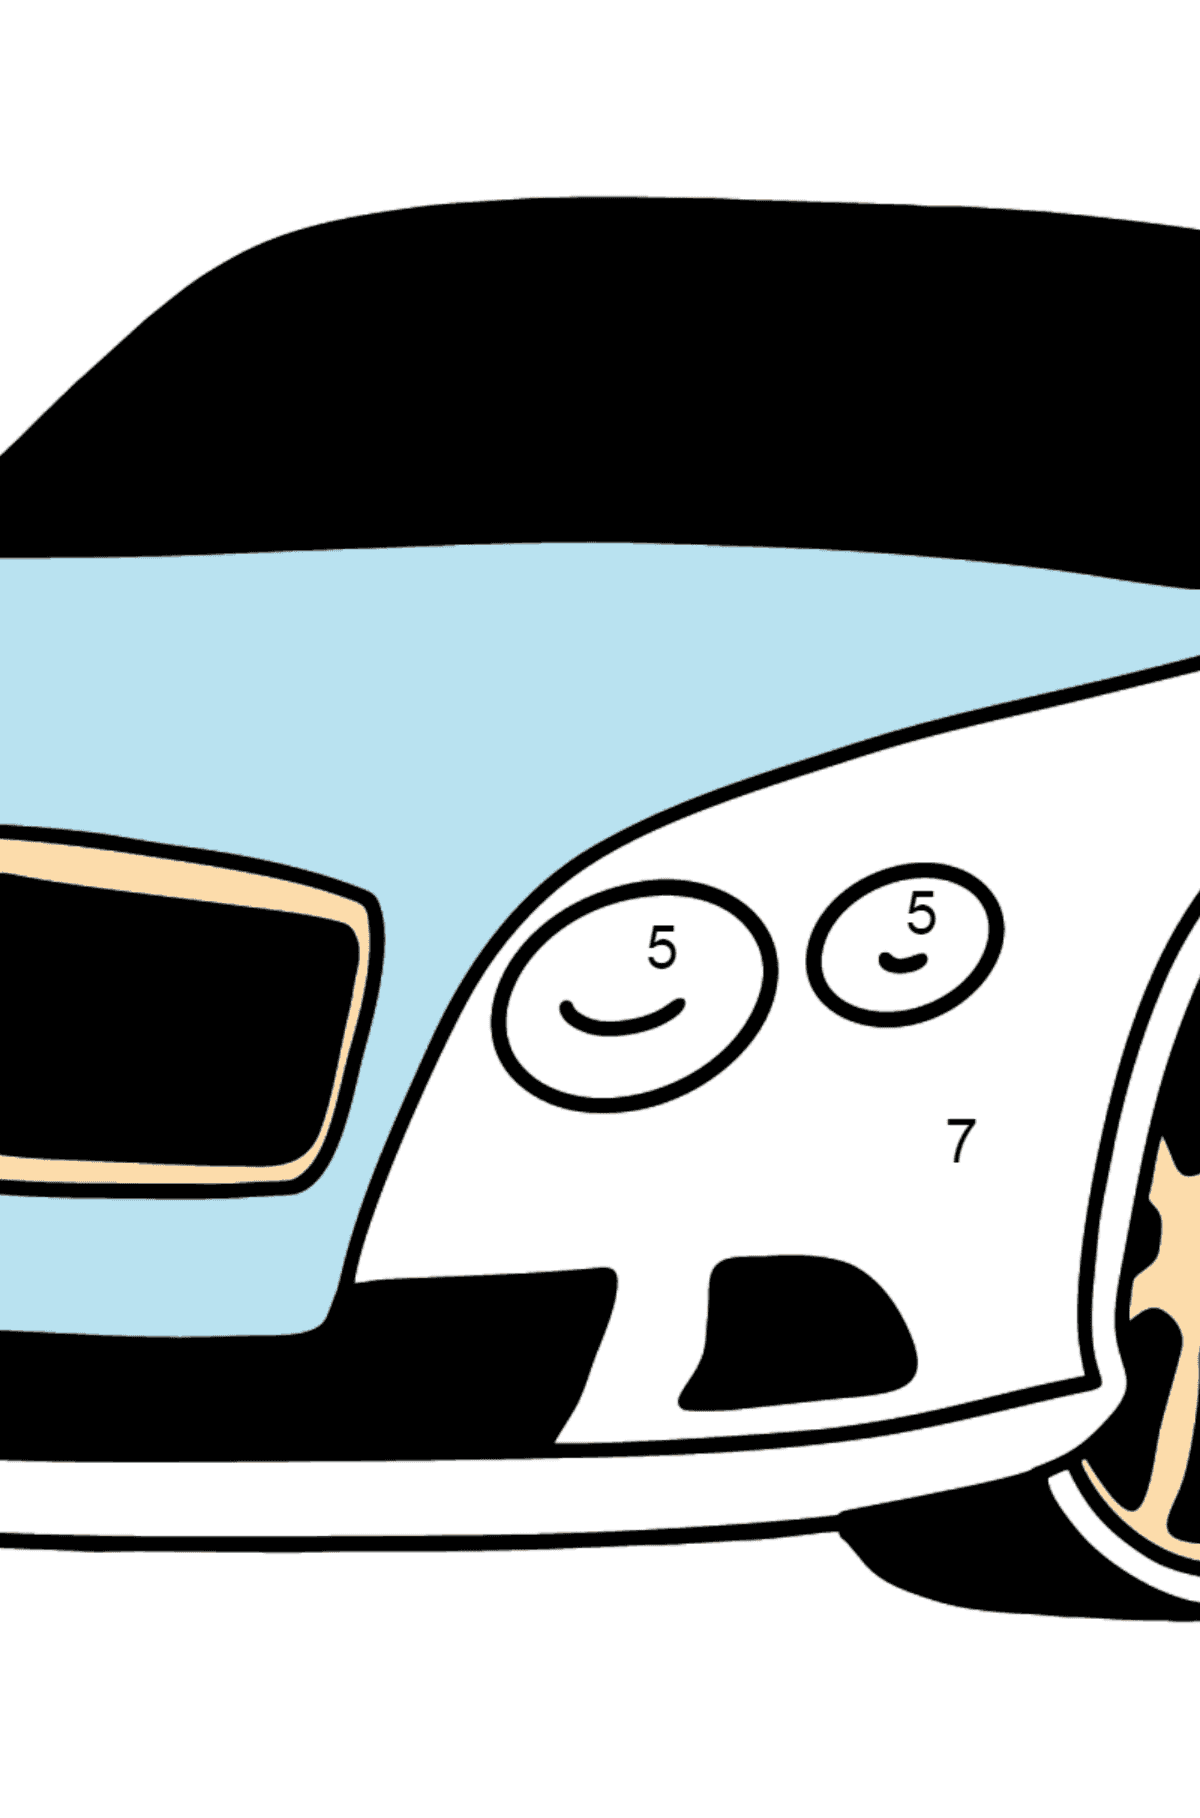 Bentley Continental GT Car coloring page - Coloring by Numbers for Kids